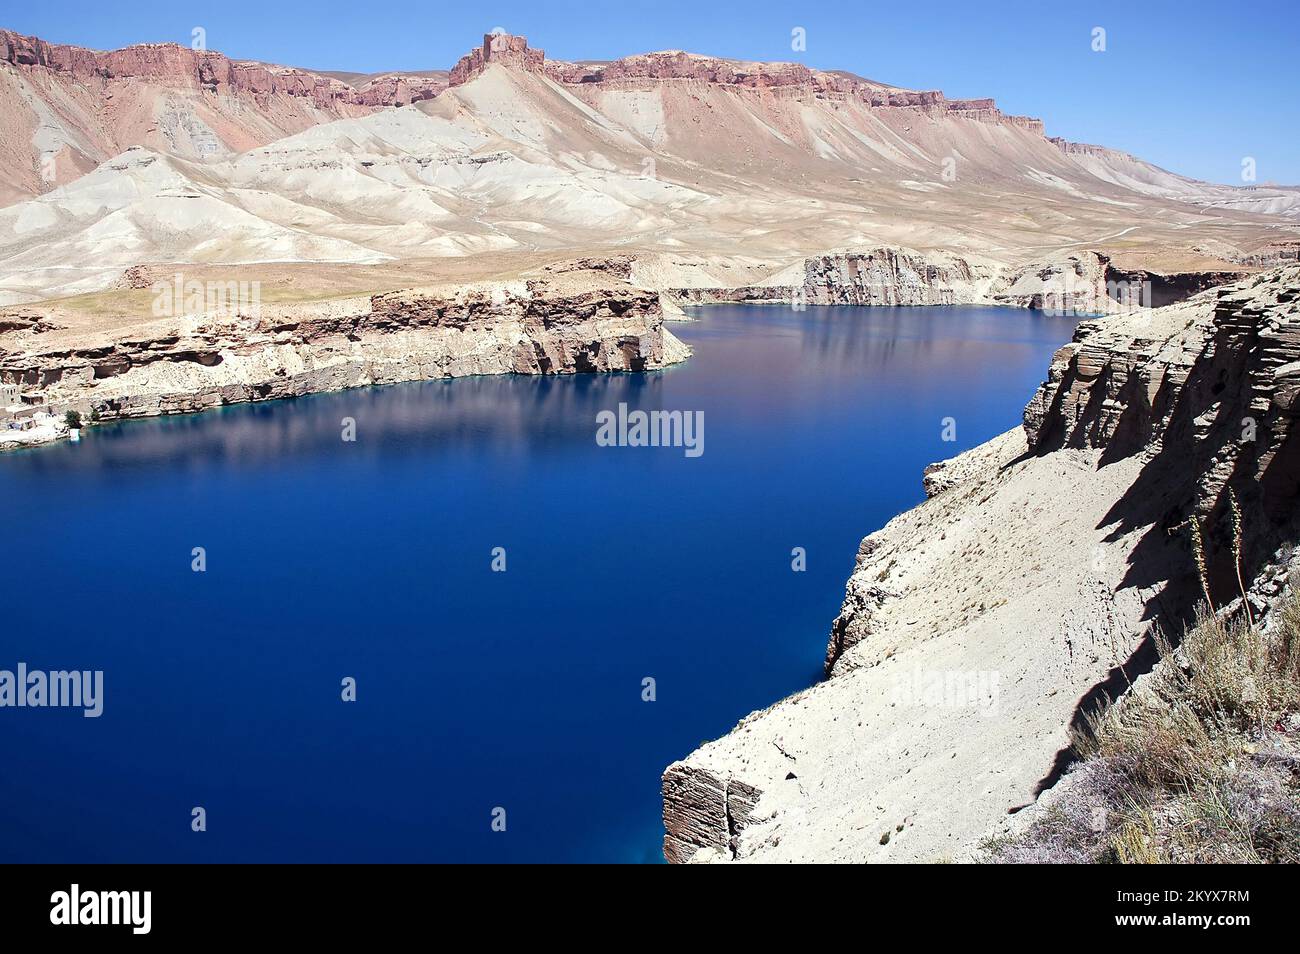 Band-e Amir lakes near Bamyan (Bamiyan) in Central Afghanistan. This is the largest of the natural blue lakes at Band e Amir. Stock Photo